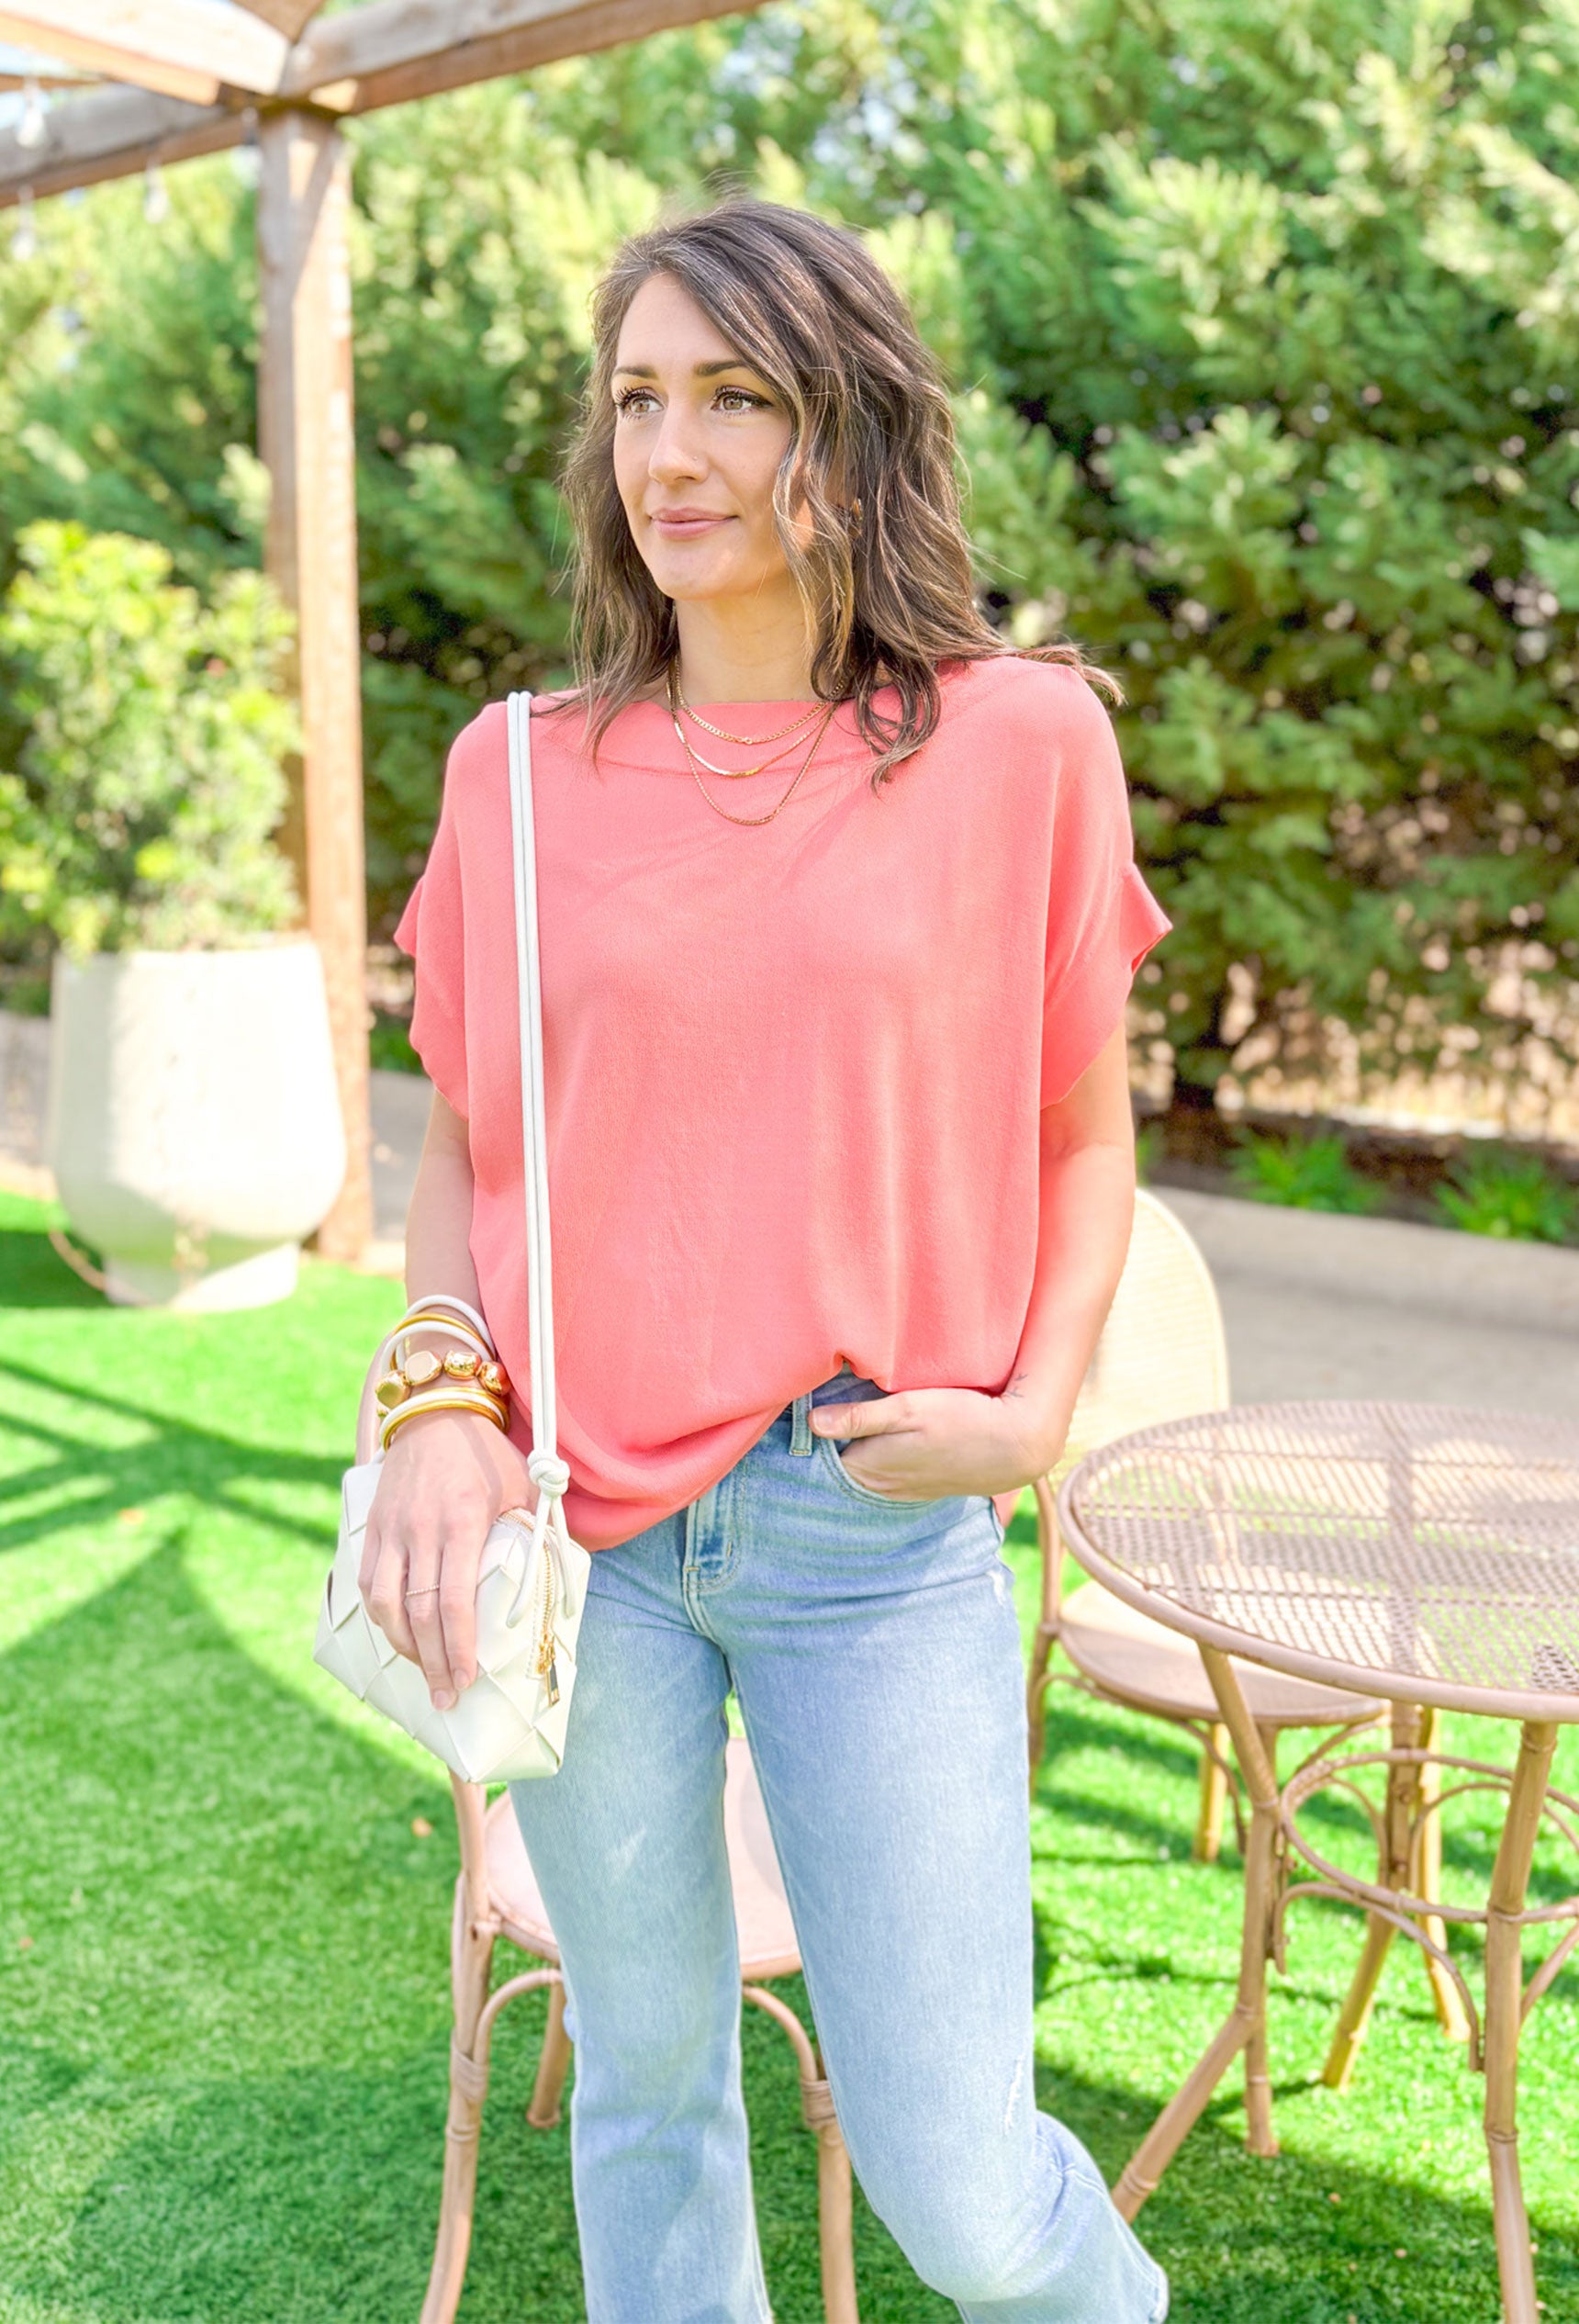 Old Ways Top in Salmon, light weight short sleeve top in a salmon color 